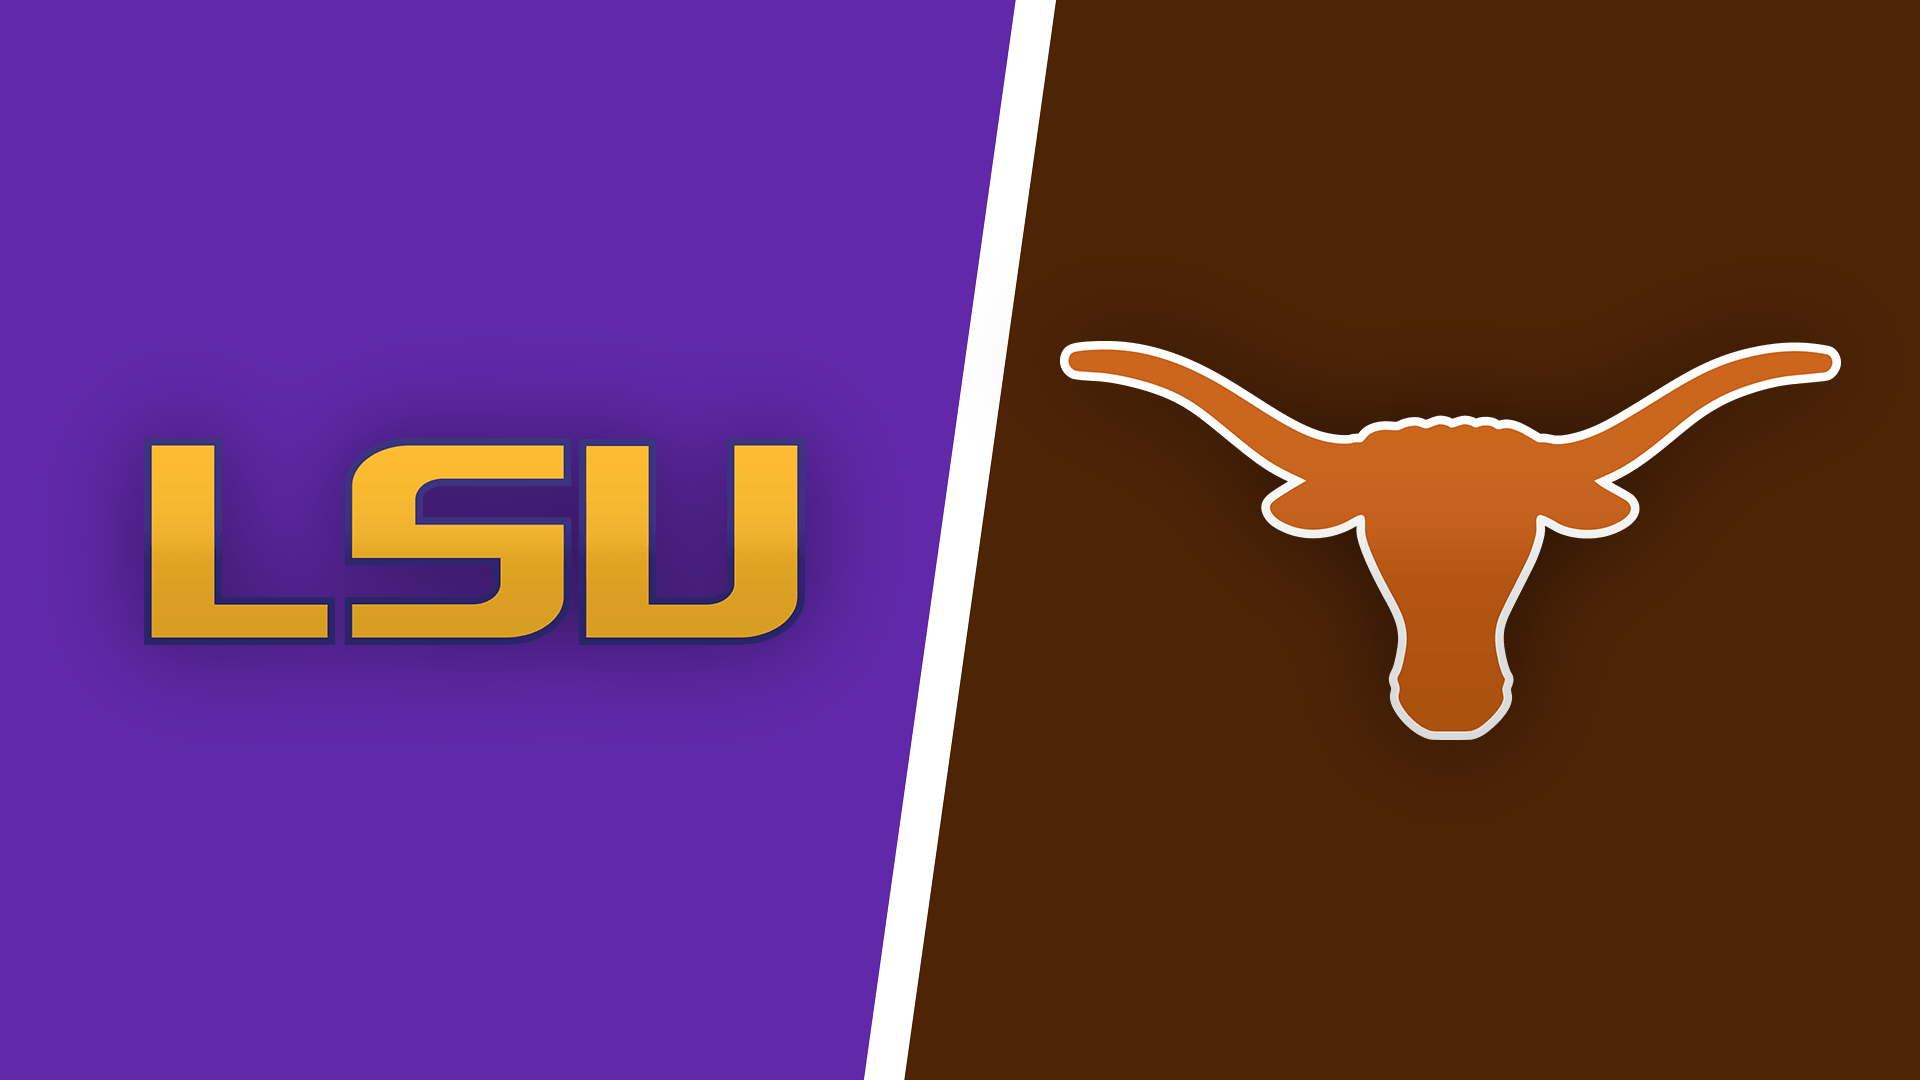 Lsu Live Free Wallpapers